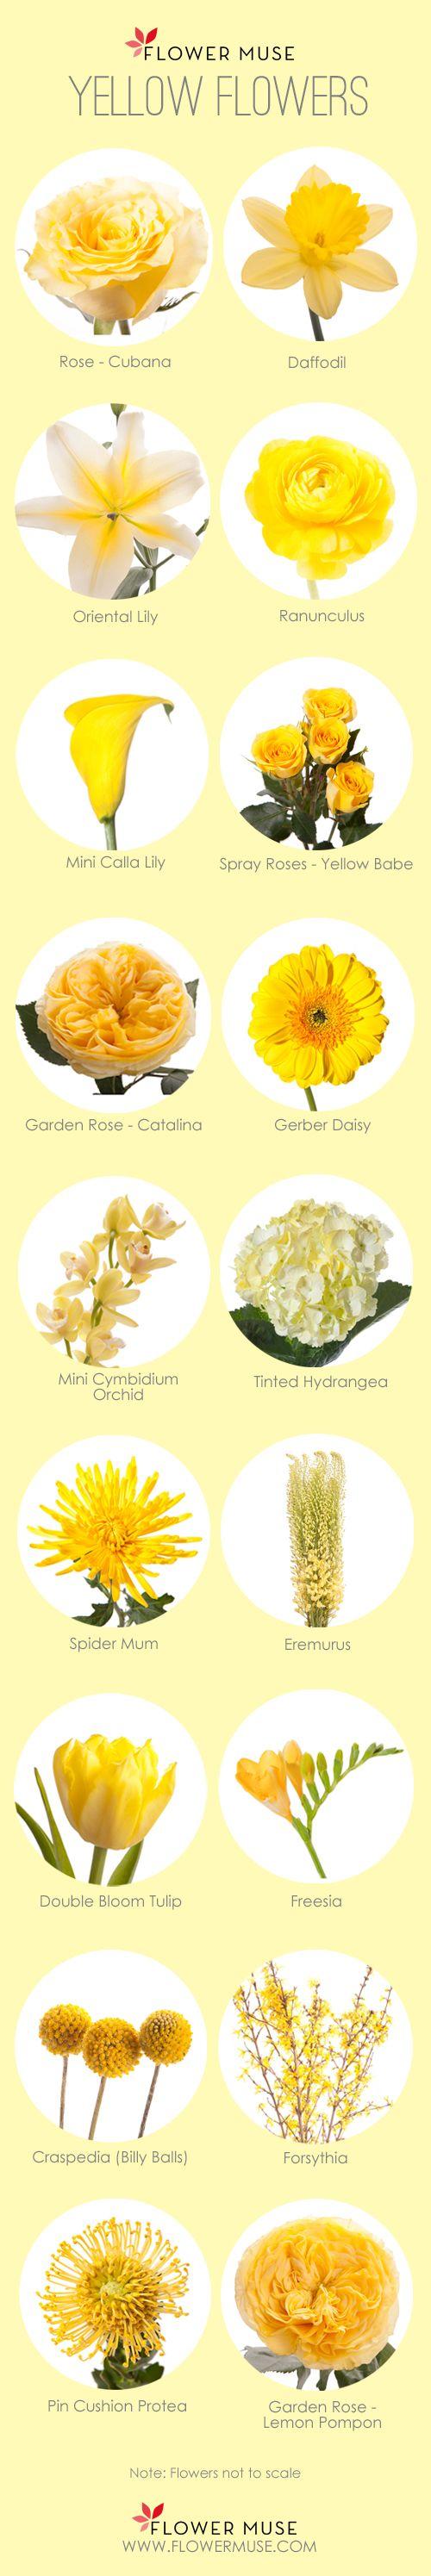 Wedding - Our Favorite: Yellow Flowers - Flower Muse Blog